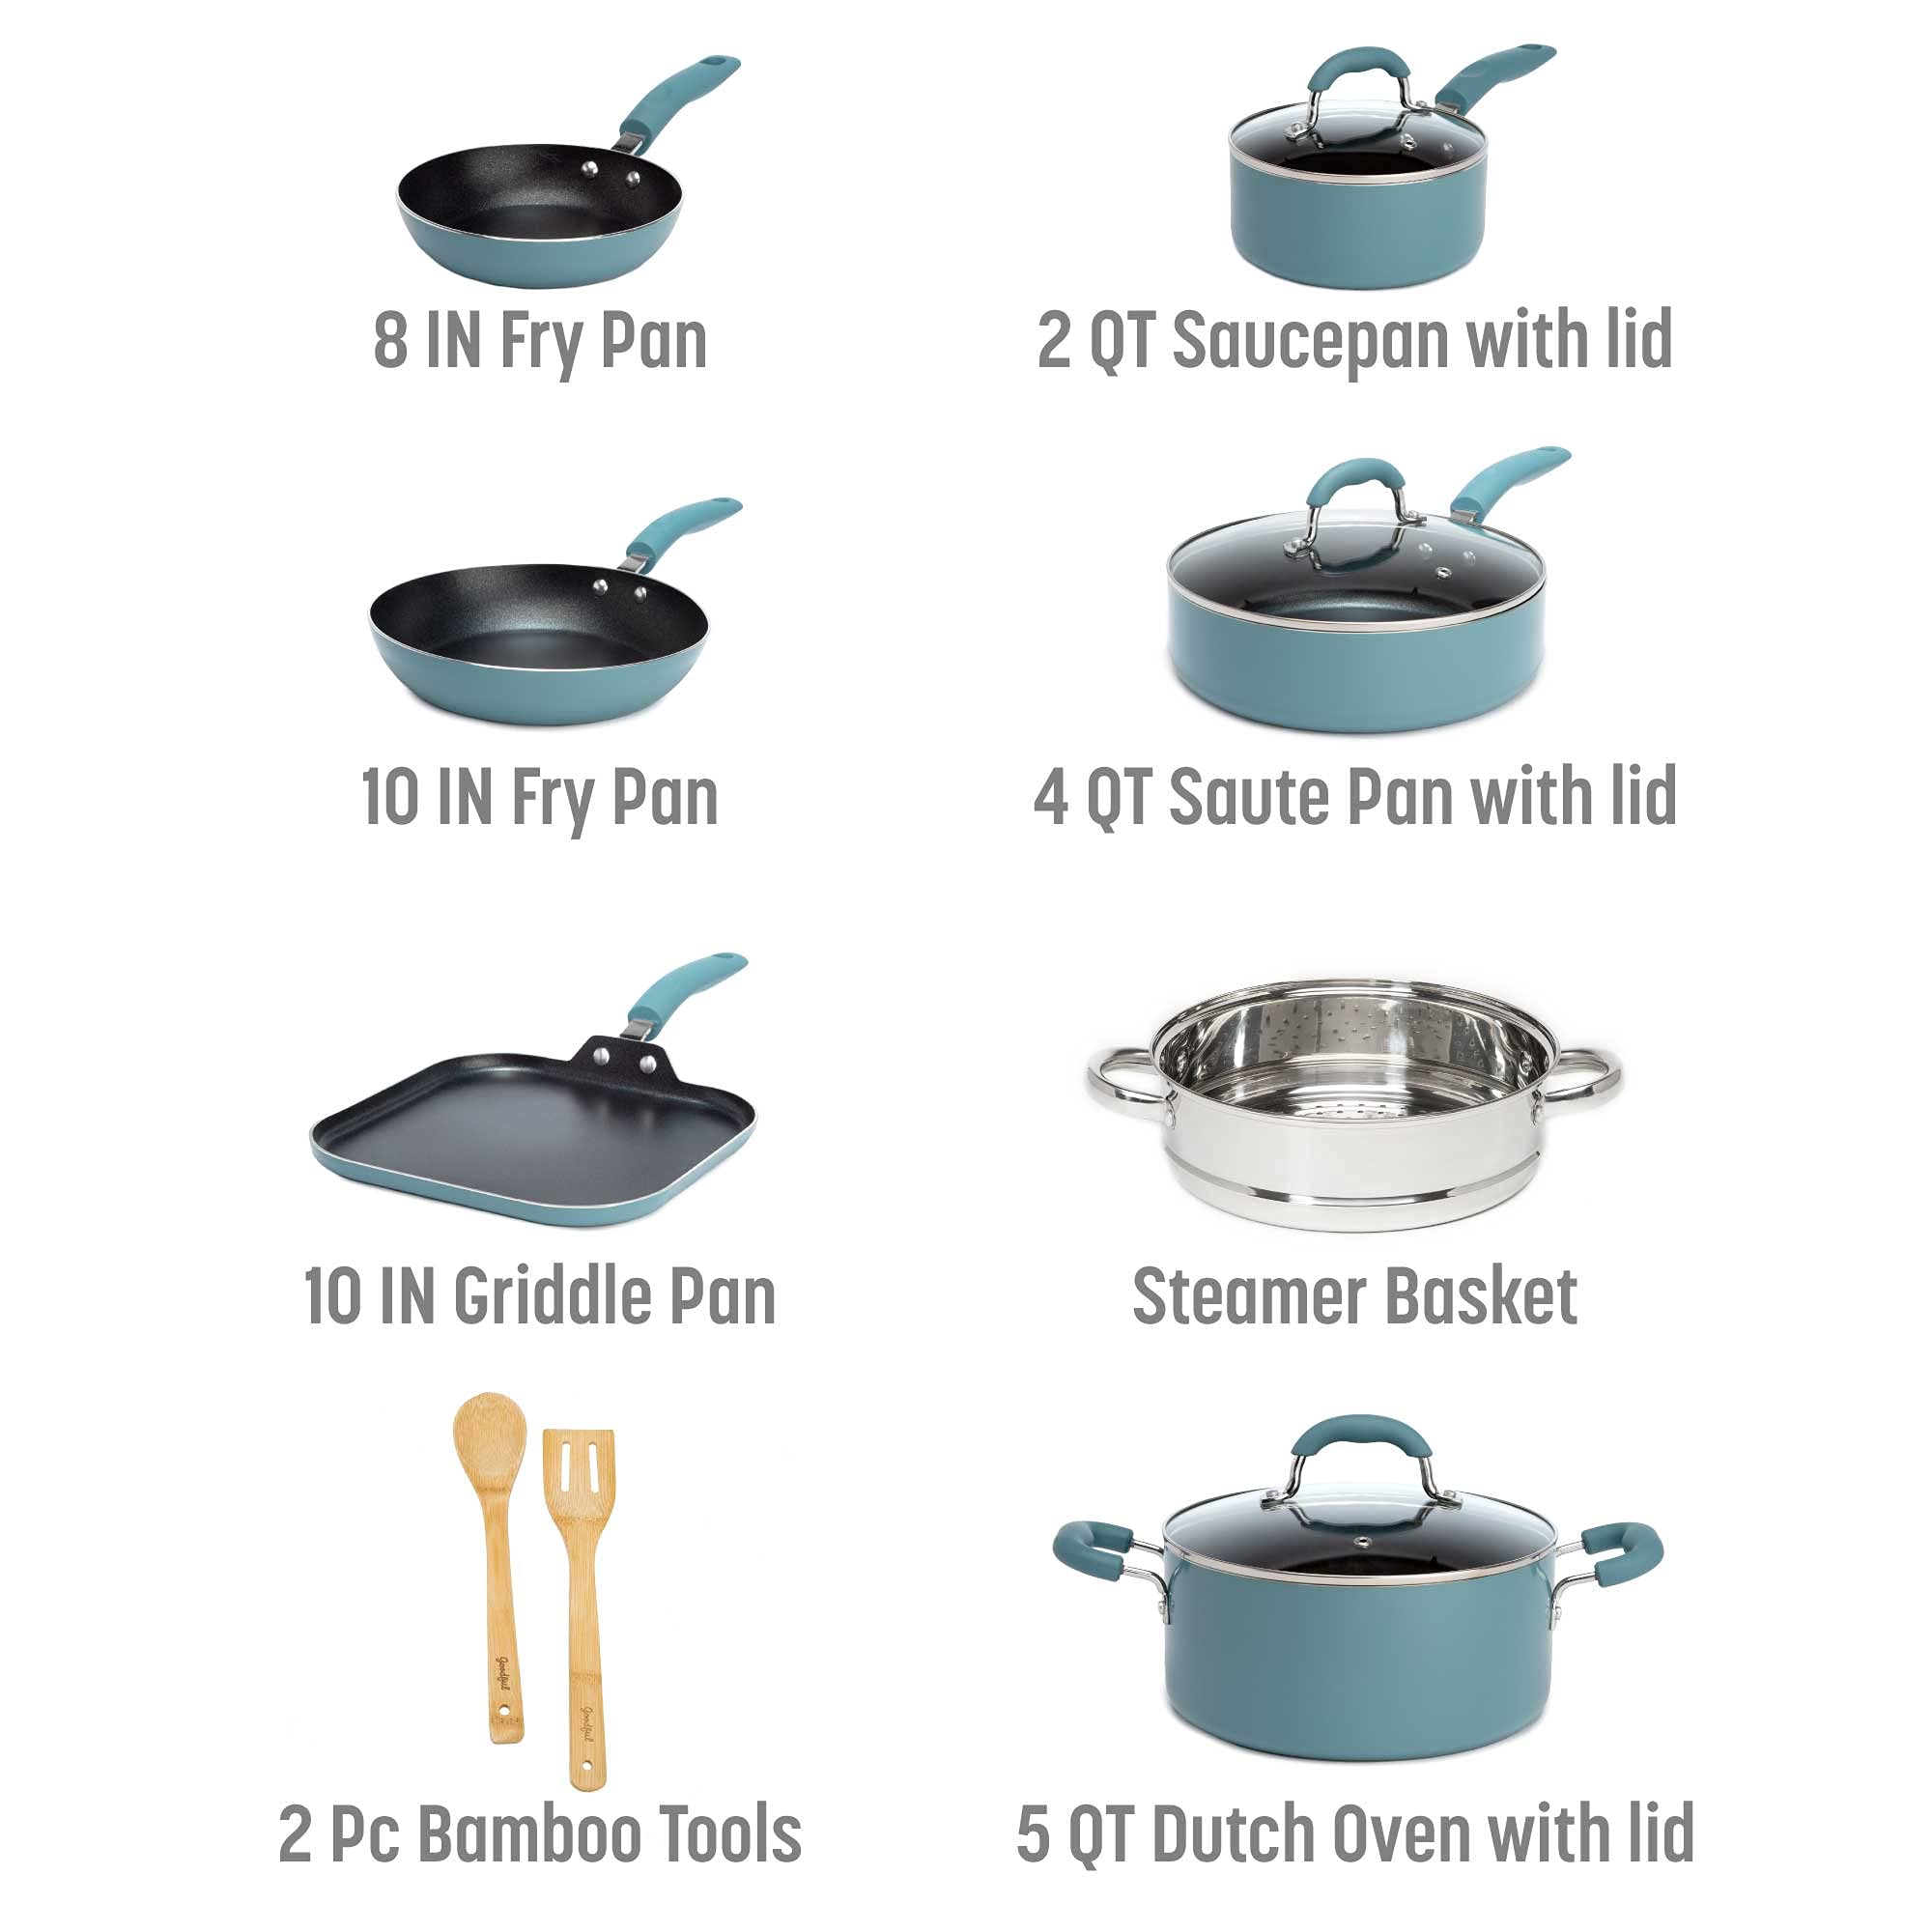 Goodful Cookware Set with Premium Non-Stick Coating, Dishwasher Safe Pots and Pans, Tempered Glass Steam Vented Lids, Stainless Steel Steamer, and Bamboo Cooking Utensils Set, 12-Piece, Turquoise